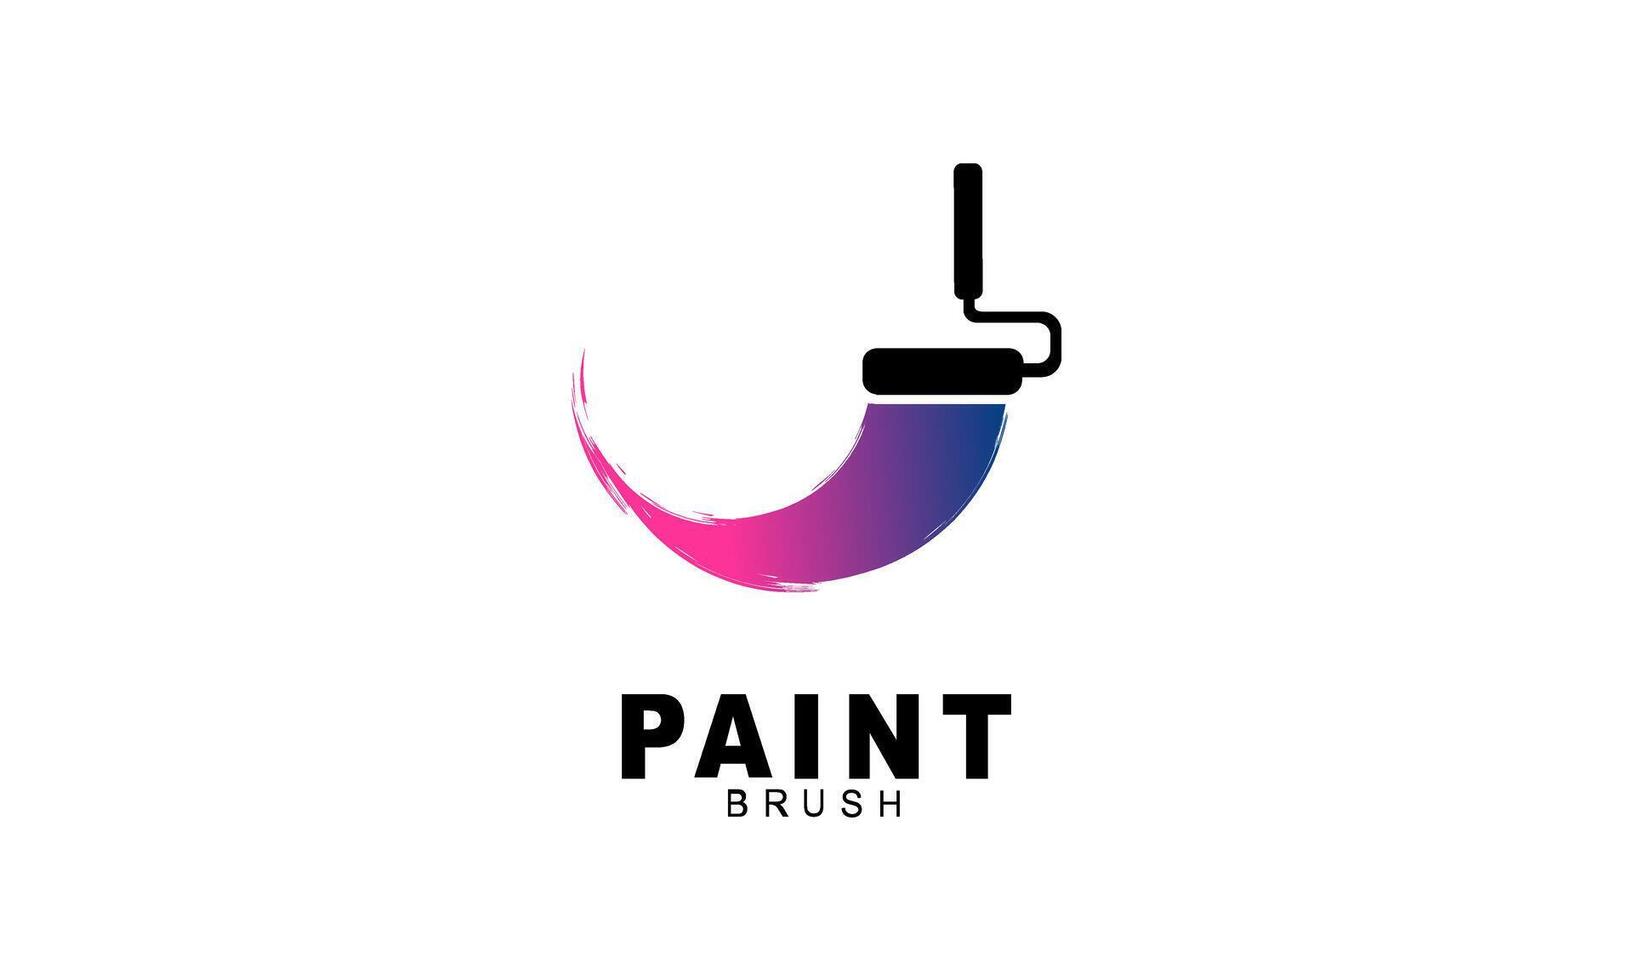 Brush and paint with full color with minimalist design style logo vector